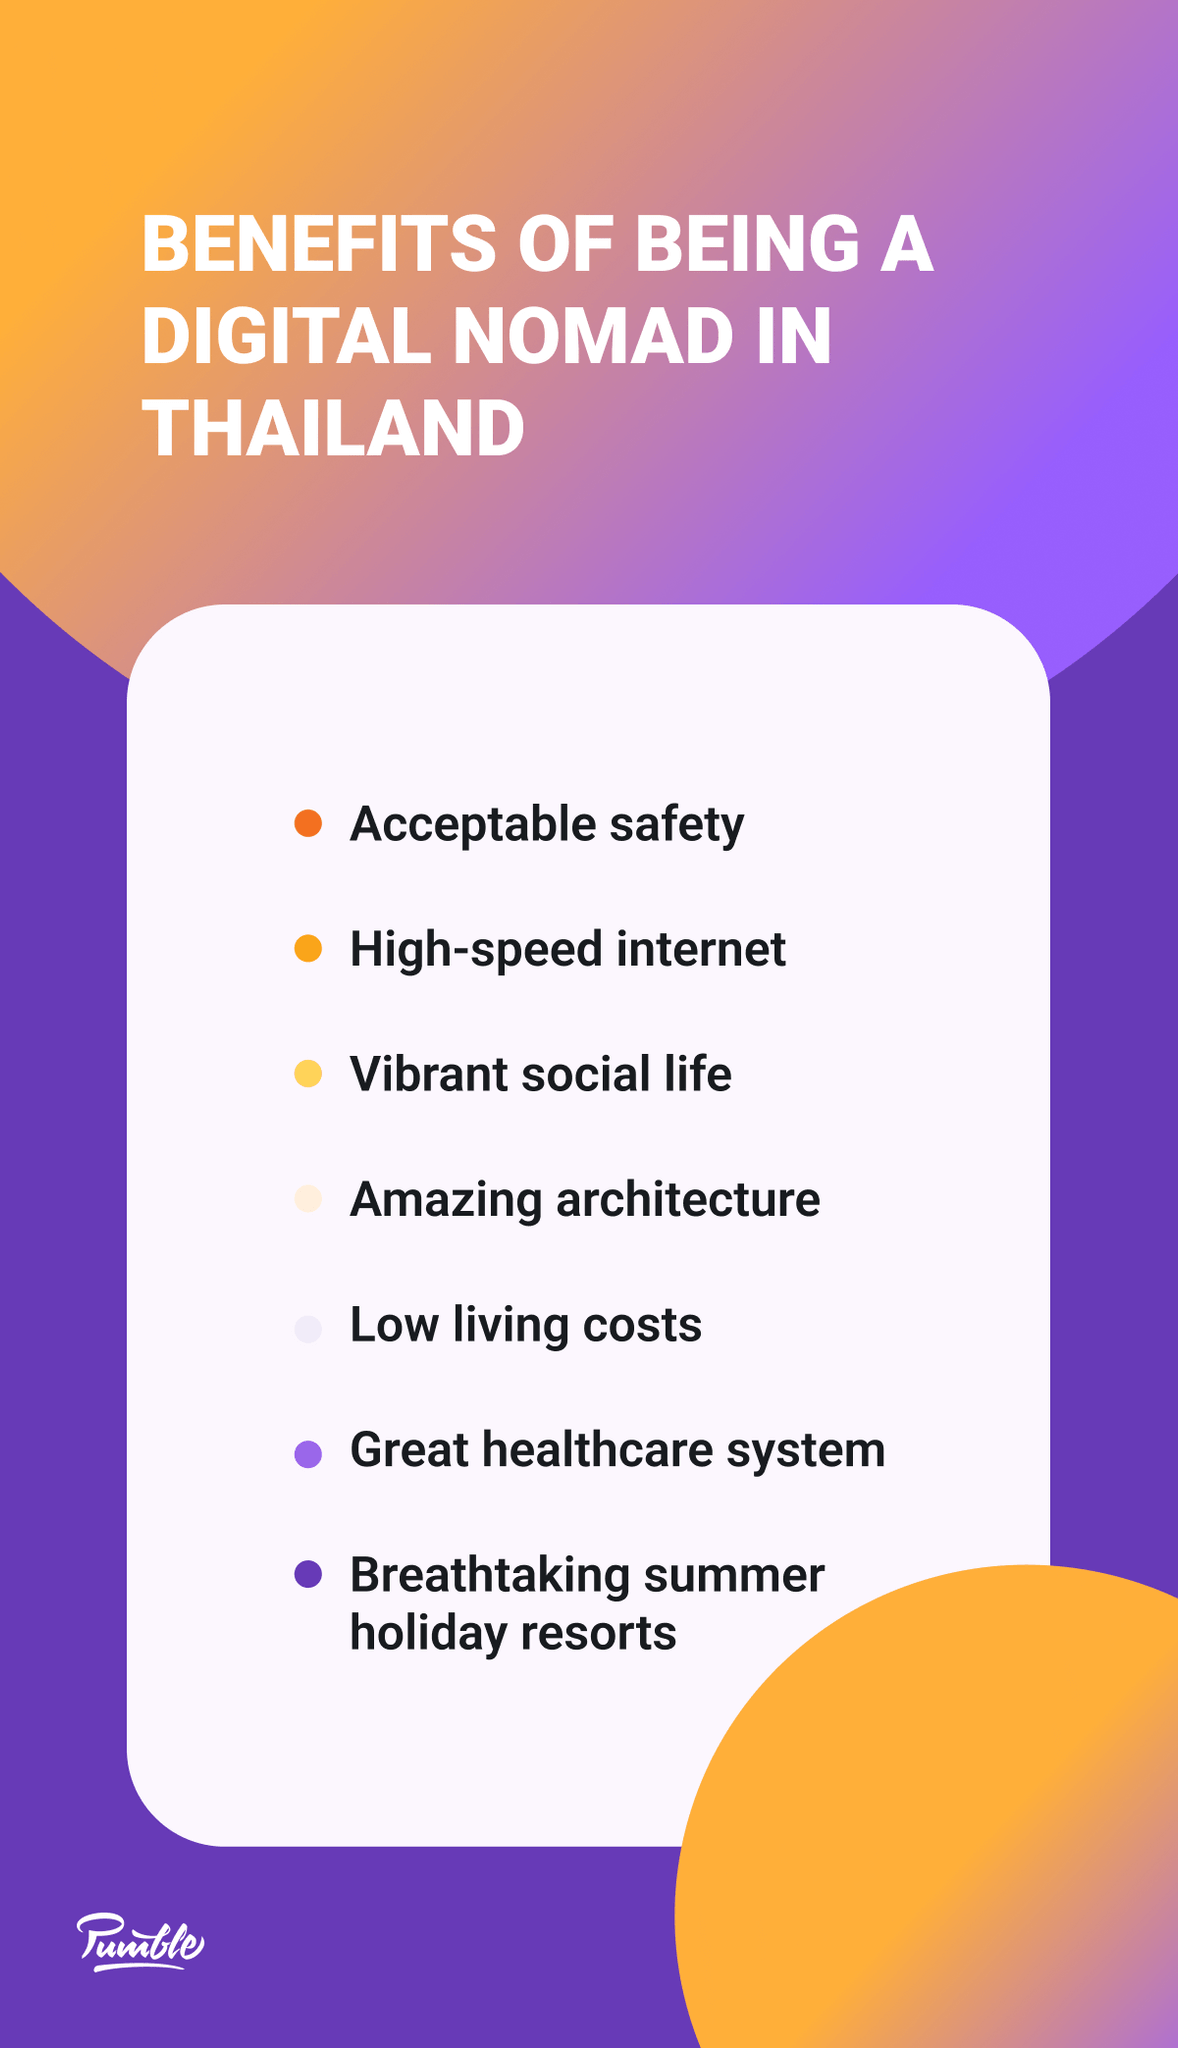 Benefits of being a digital nomad in Thailand